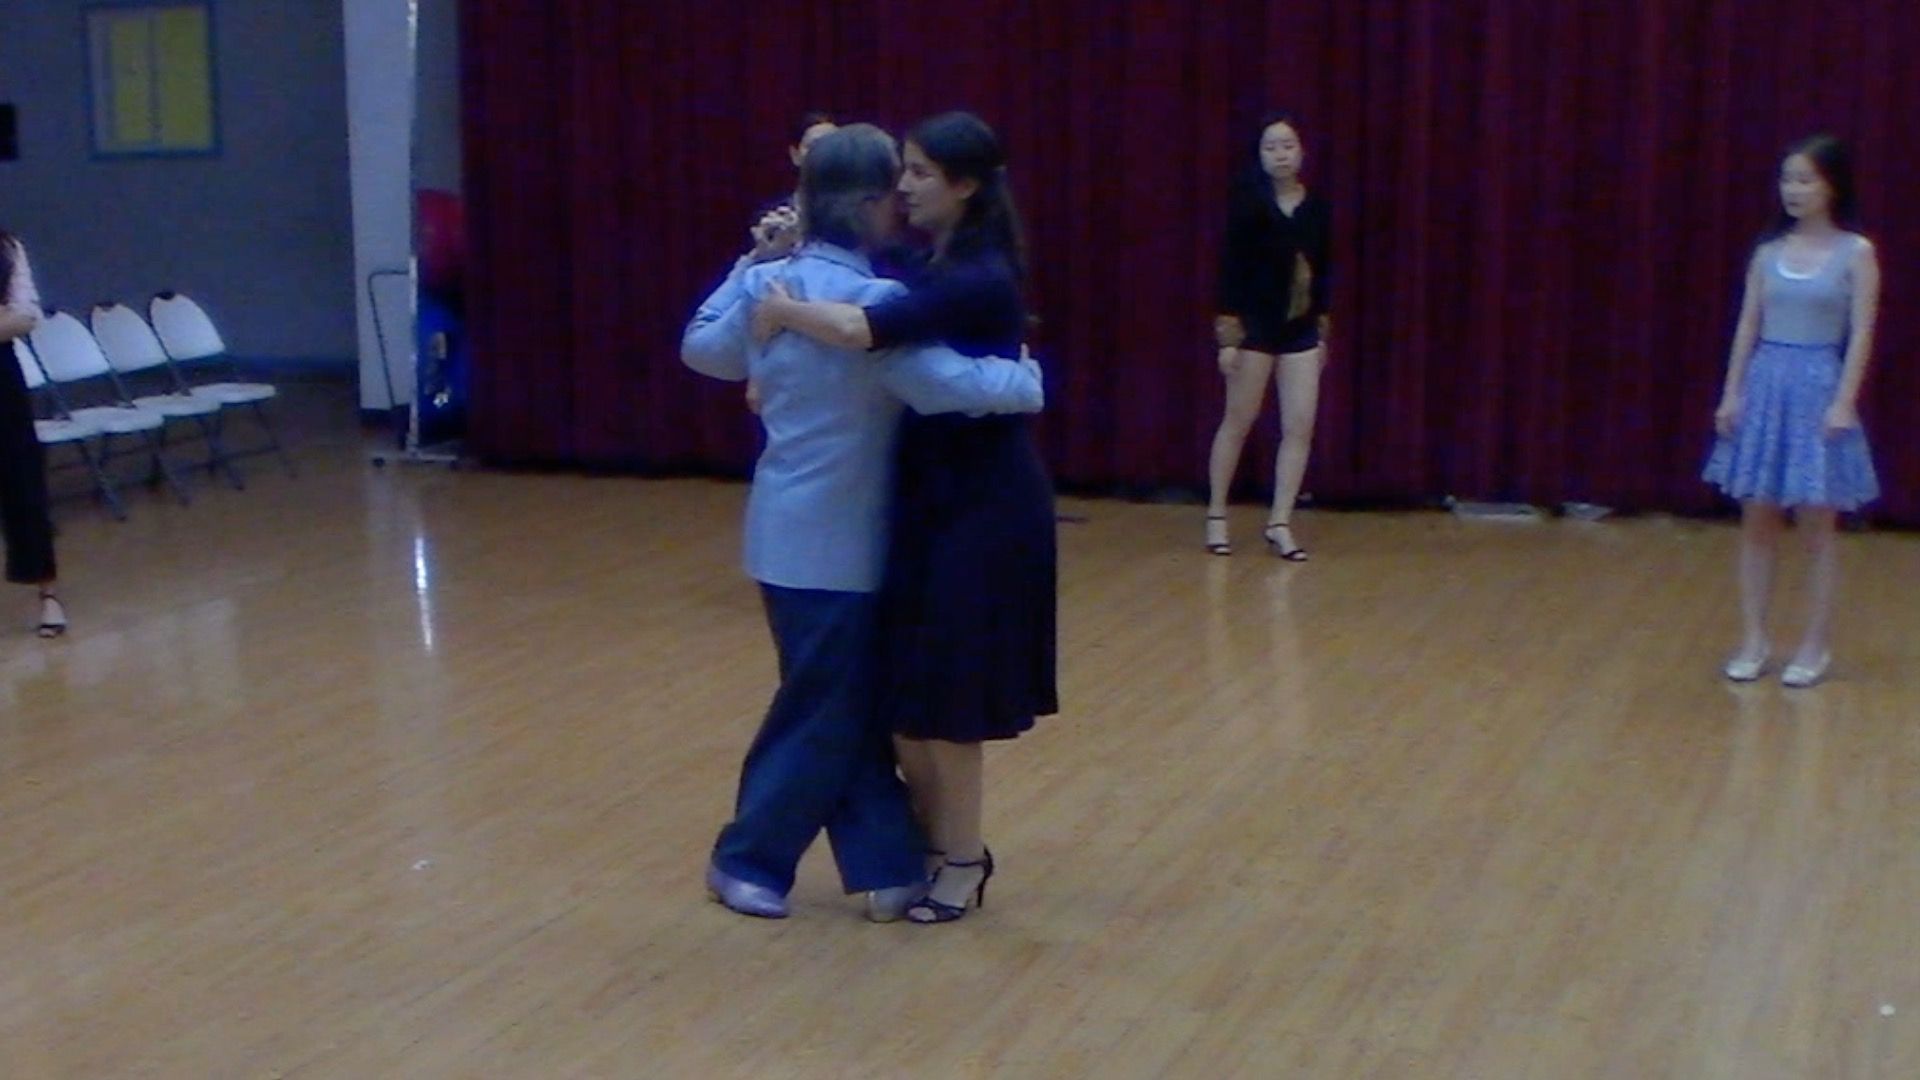 Argentine Tango Dancing with Mimi at beginner's class in San Jose, California, September 2019